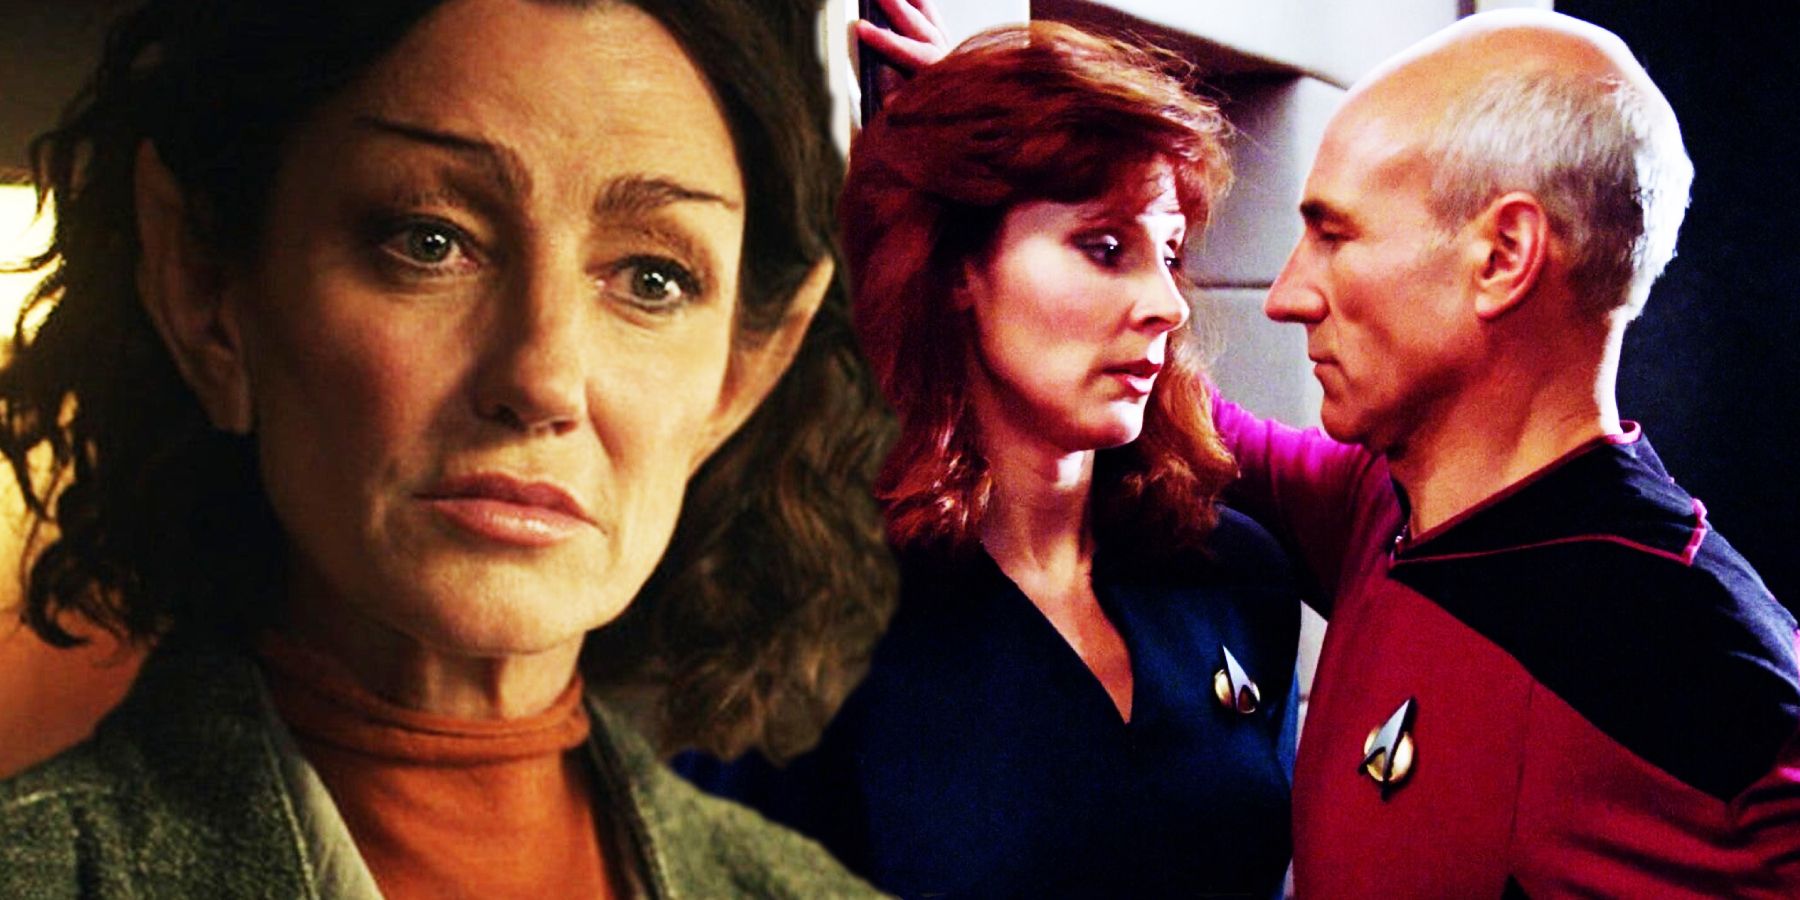 Laris in Picard and Crusher and Picard in TNG